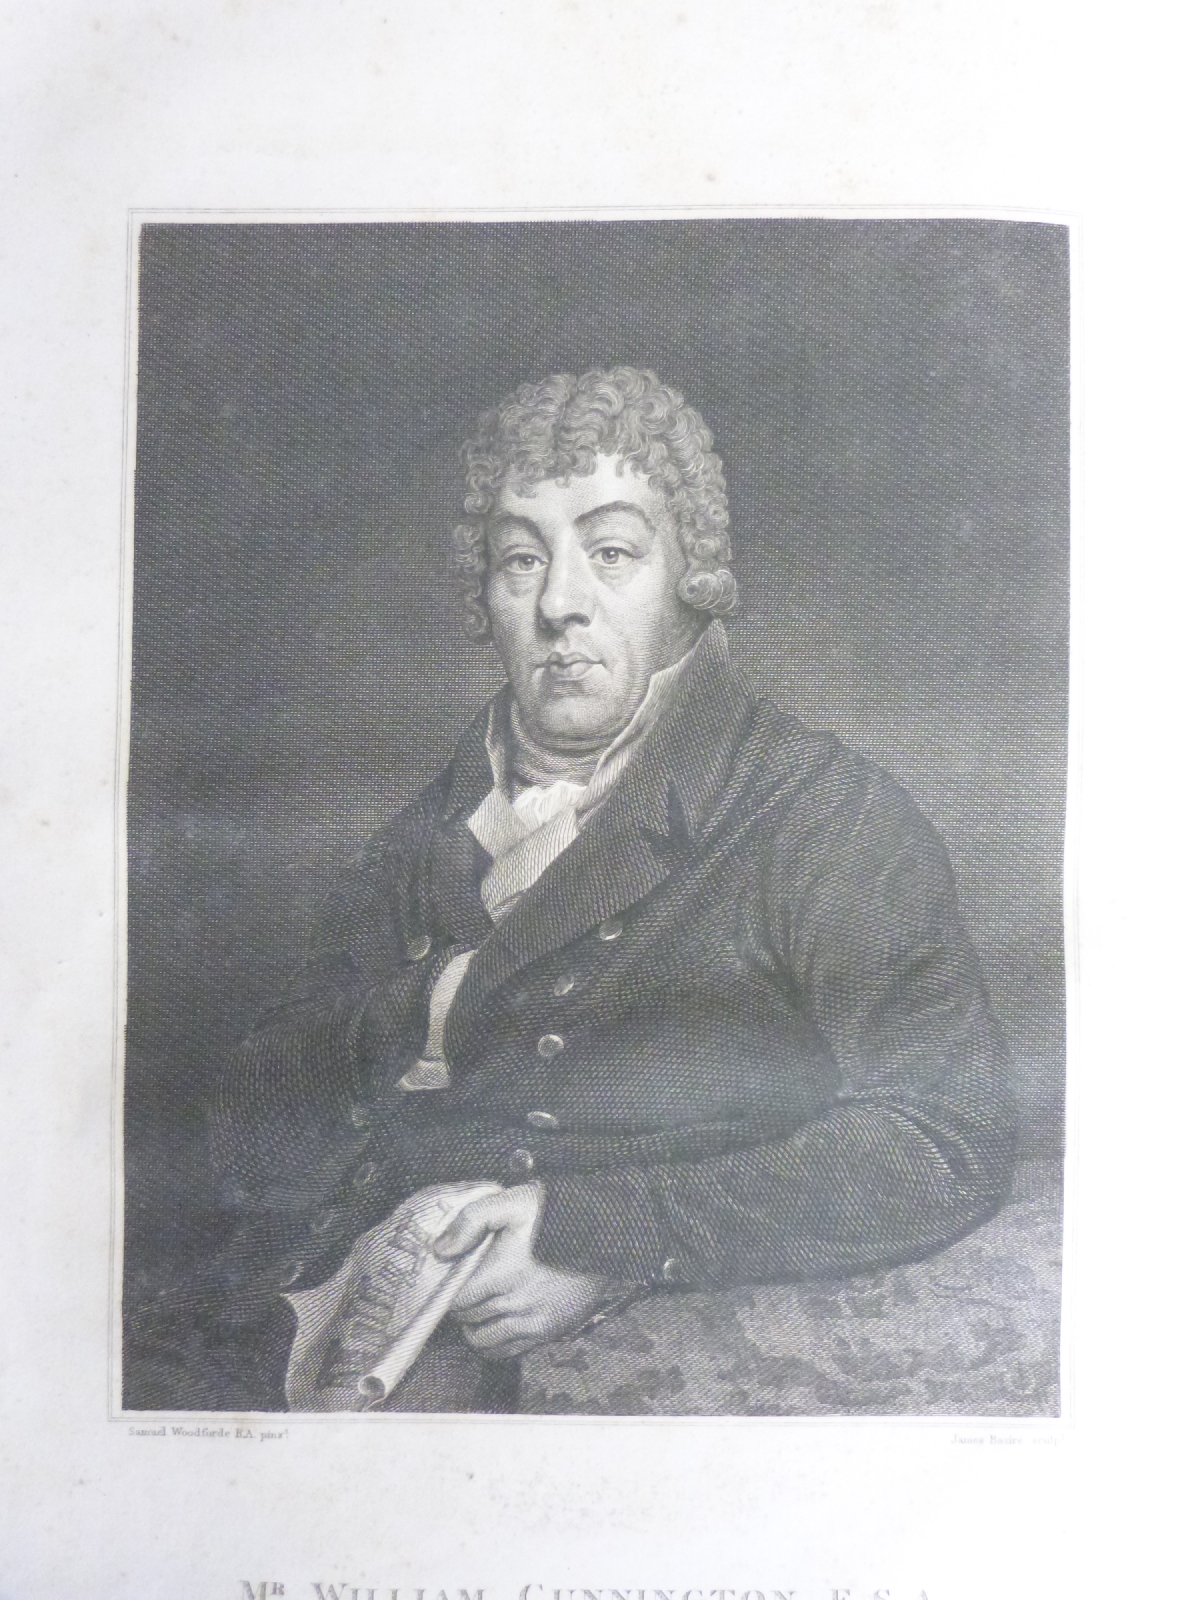 The Ancient History of South Wiltshire by Sir Richard Colt Hoare, Bart published William Miller 1812 - Image 3 of 5